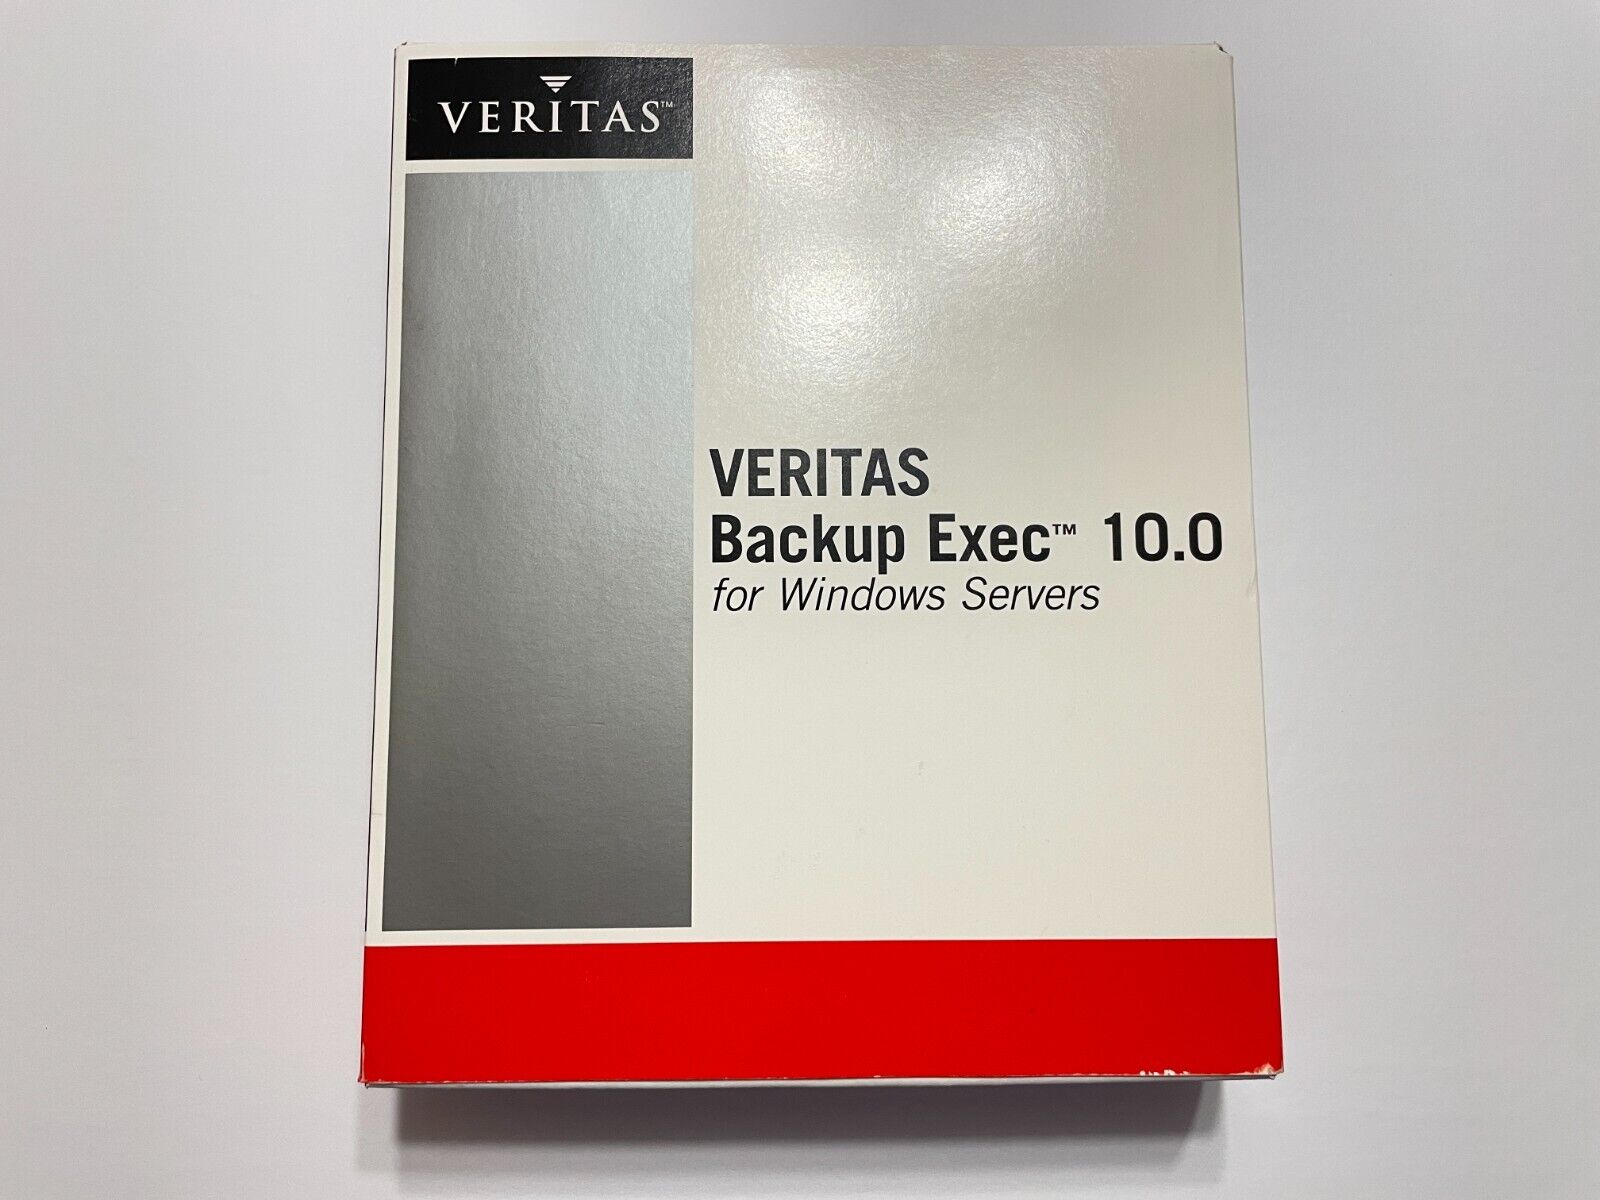 Veritas Backup Exec 10.0 for Windows Servers Complete In Box - TESTED